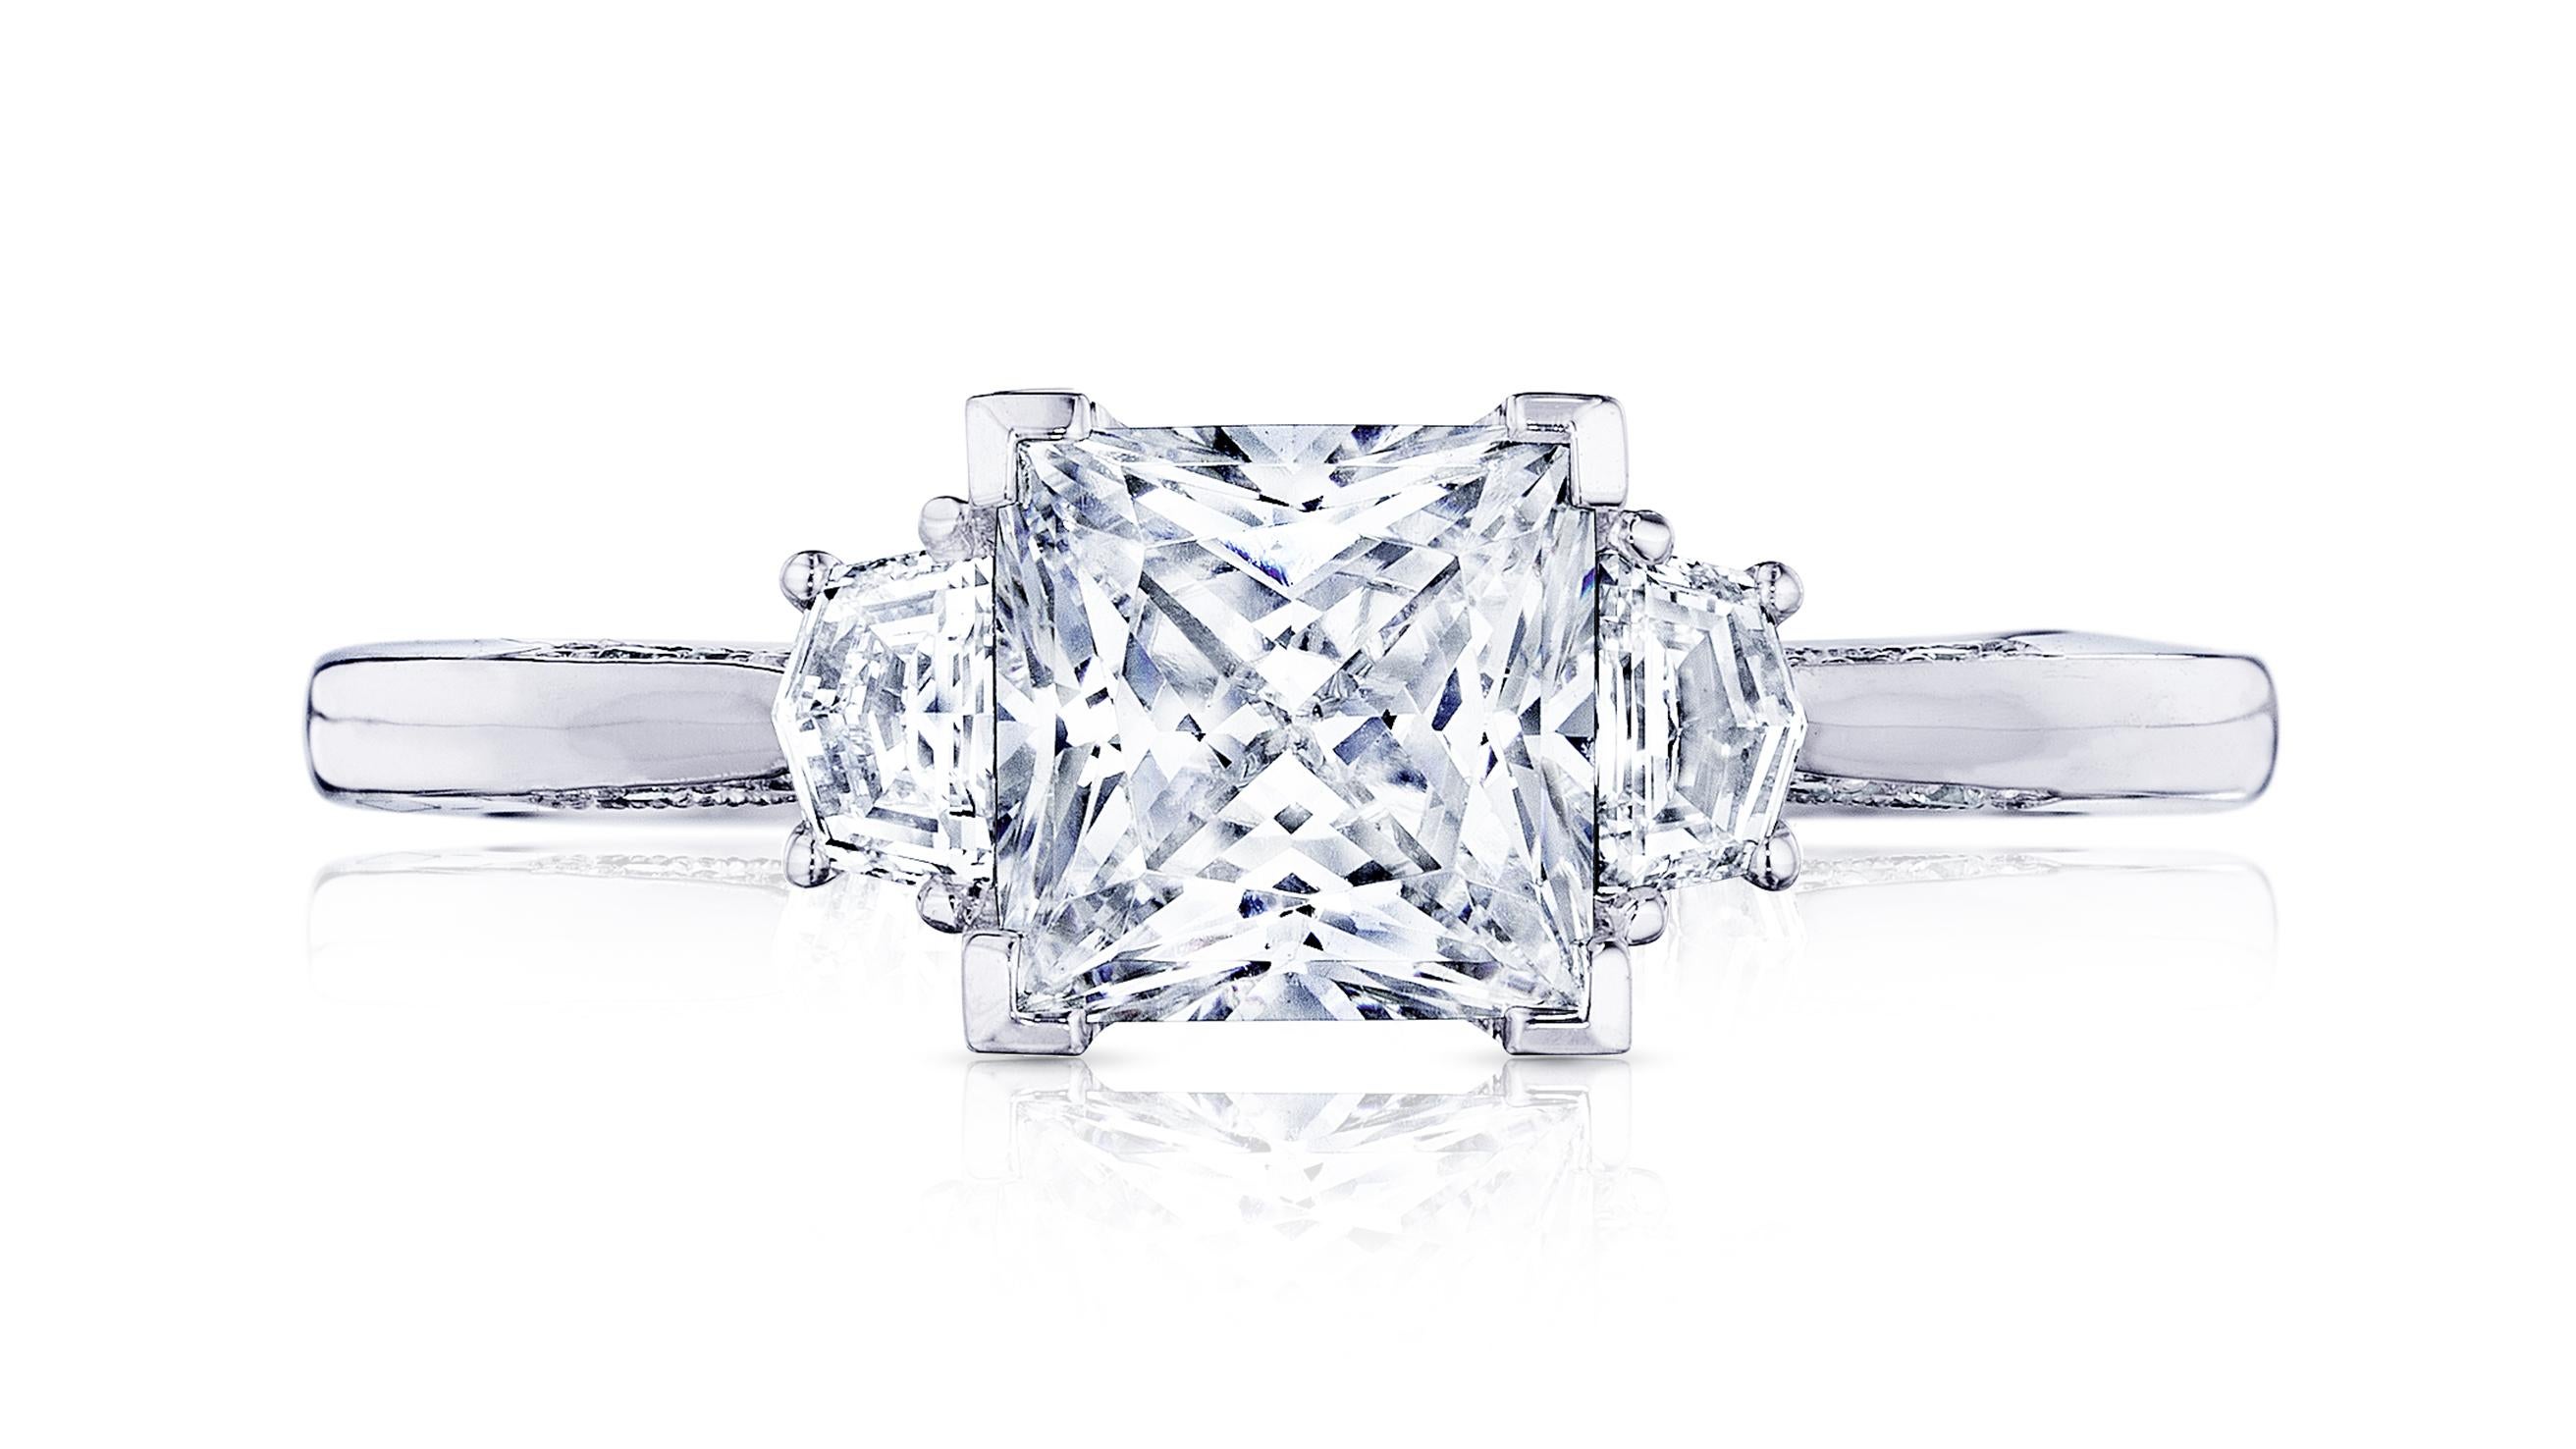 An exceptional engagement ring and sparkling precious jewel, features a princess cut brilliant diamond center stone, given prominence by two tapered trapezoid side stones on a delicate platinum band. The delicate details of this refined diamond